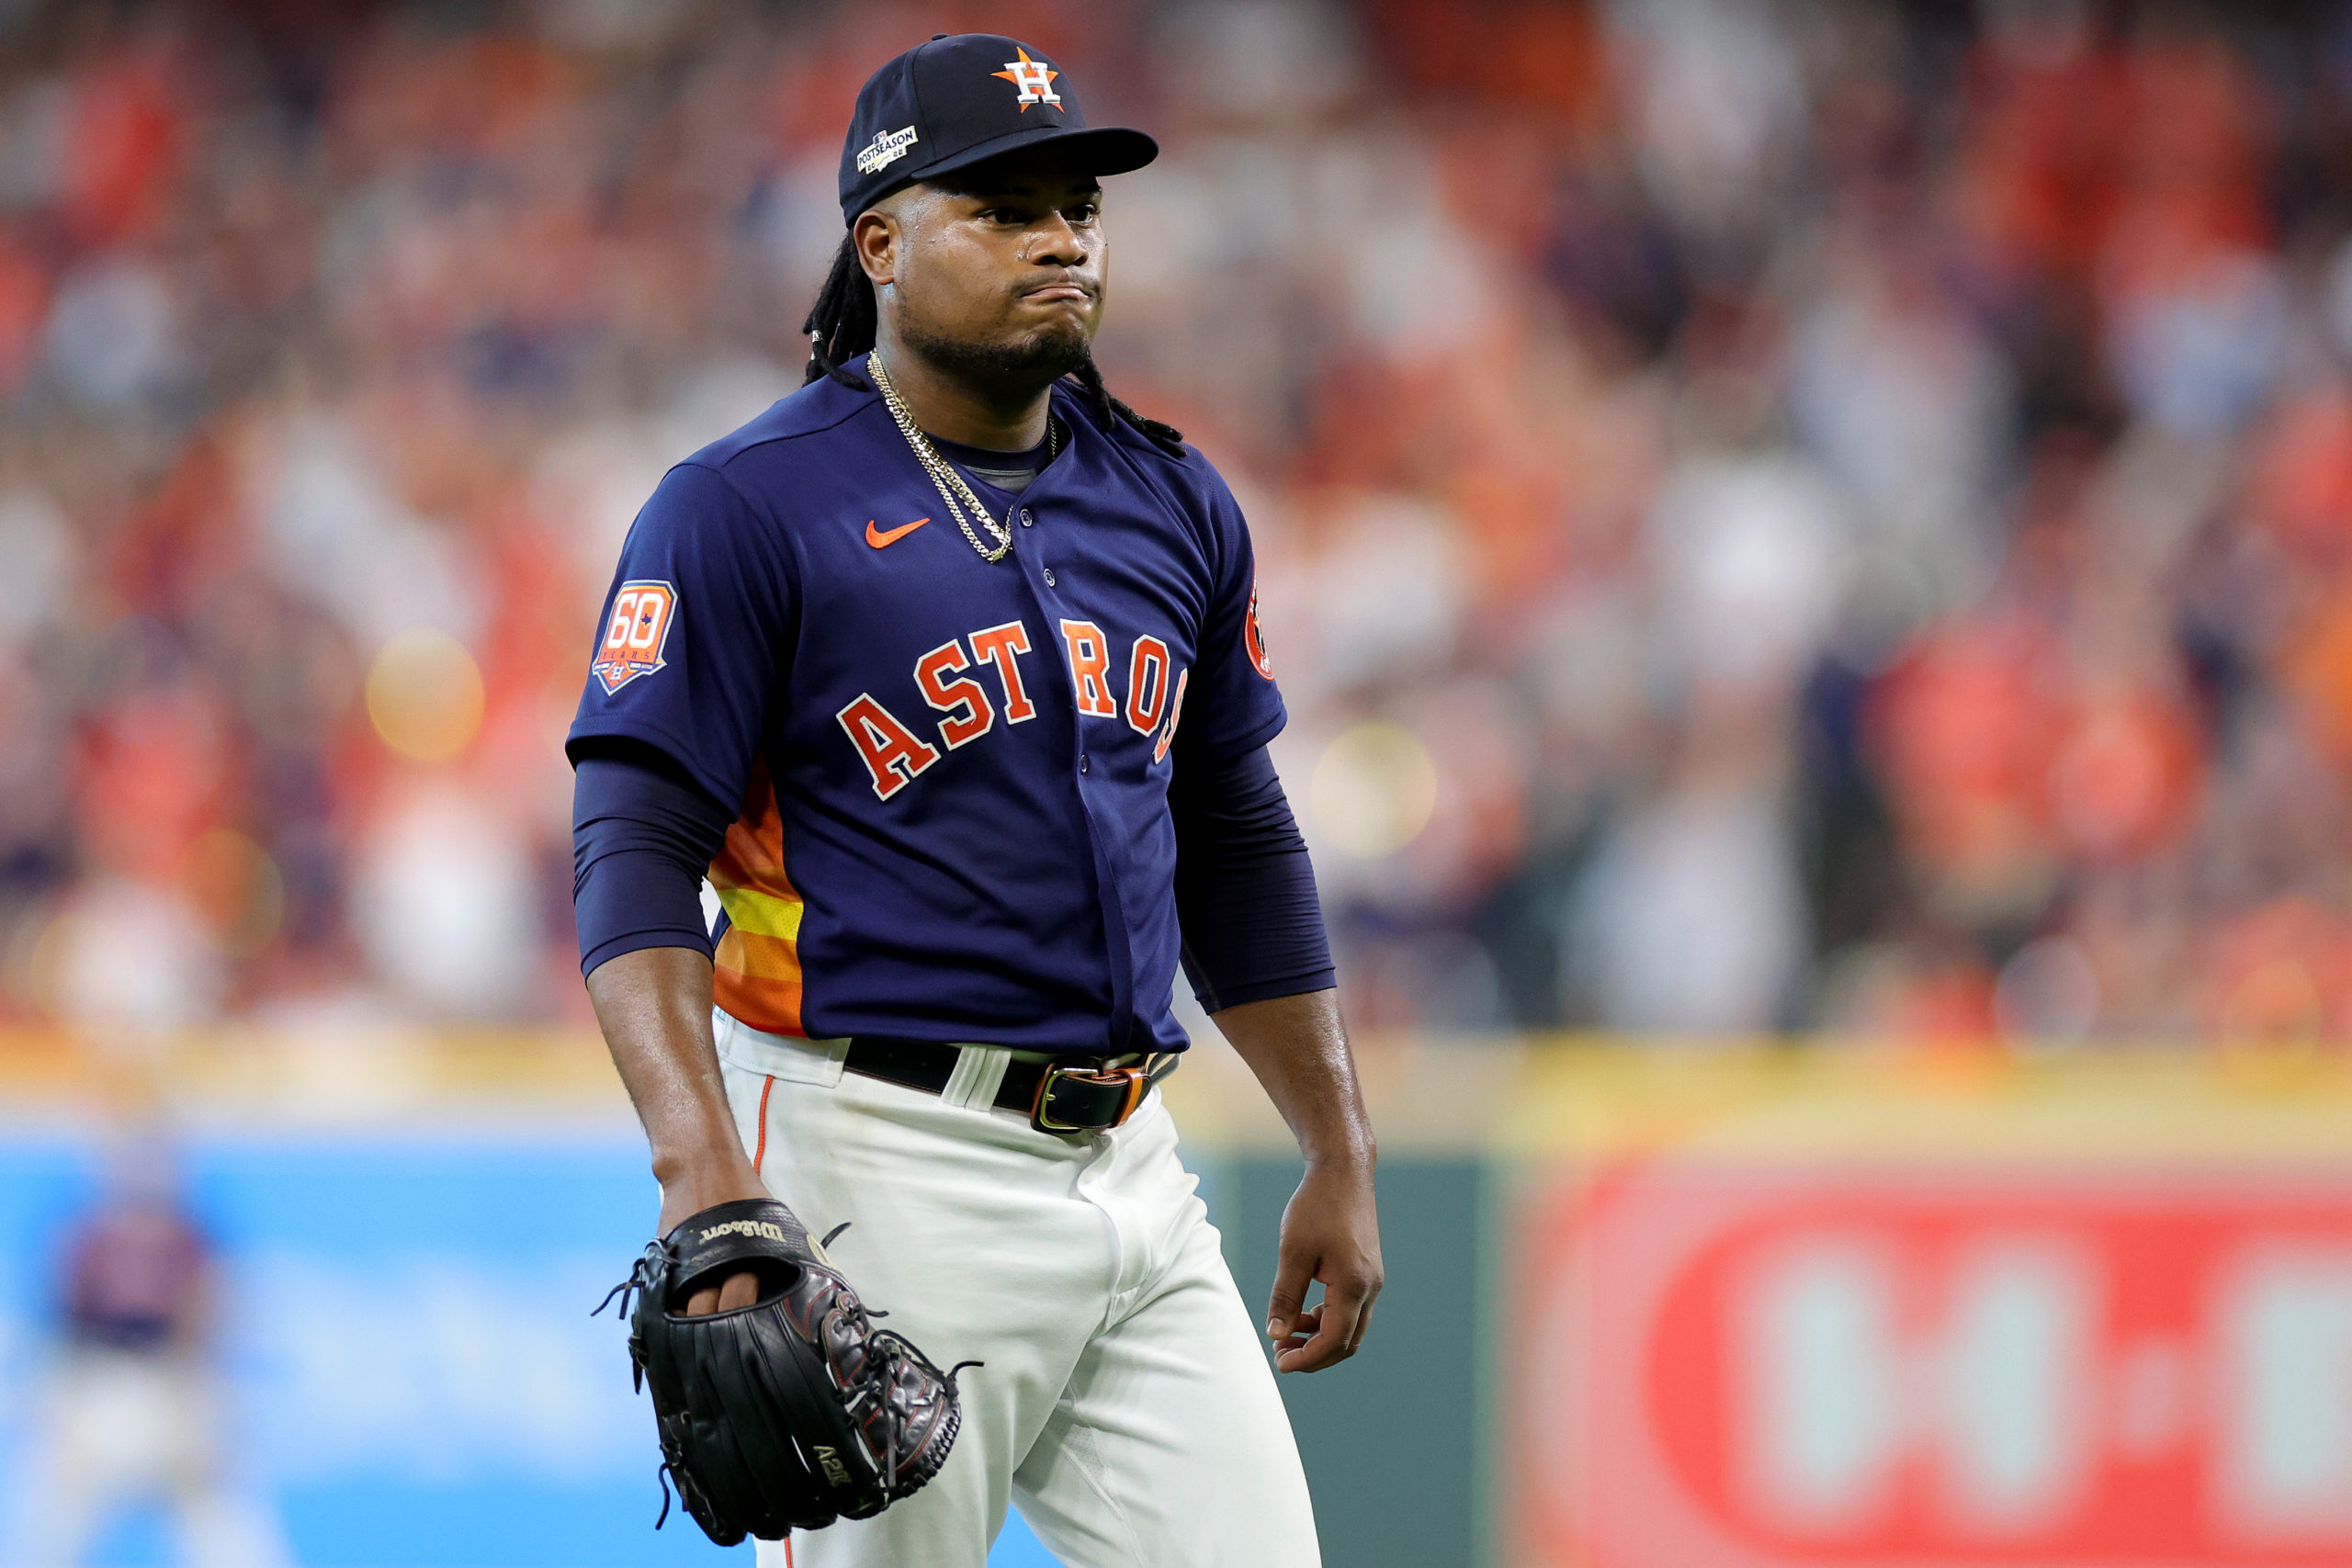 Framber Valdez ready to lead Astros staff - Our Esquina